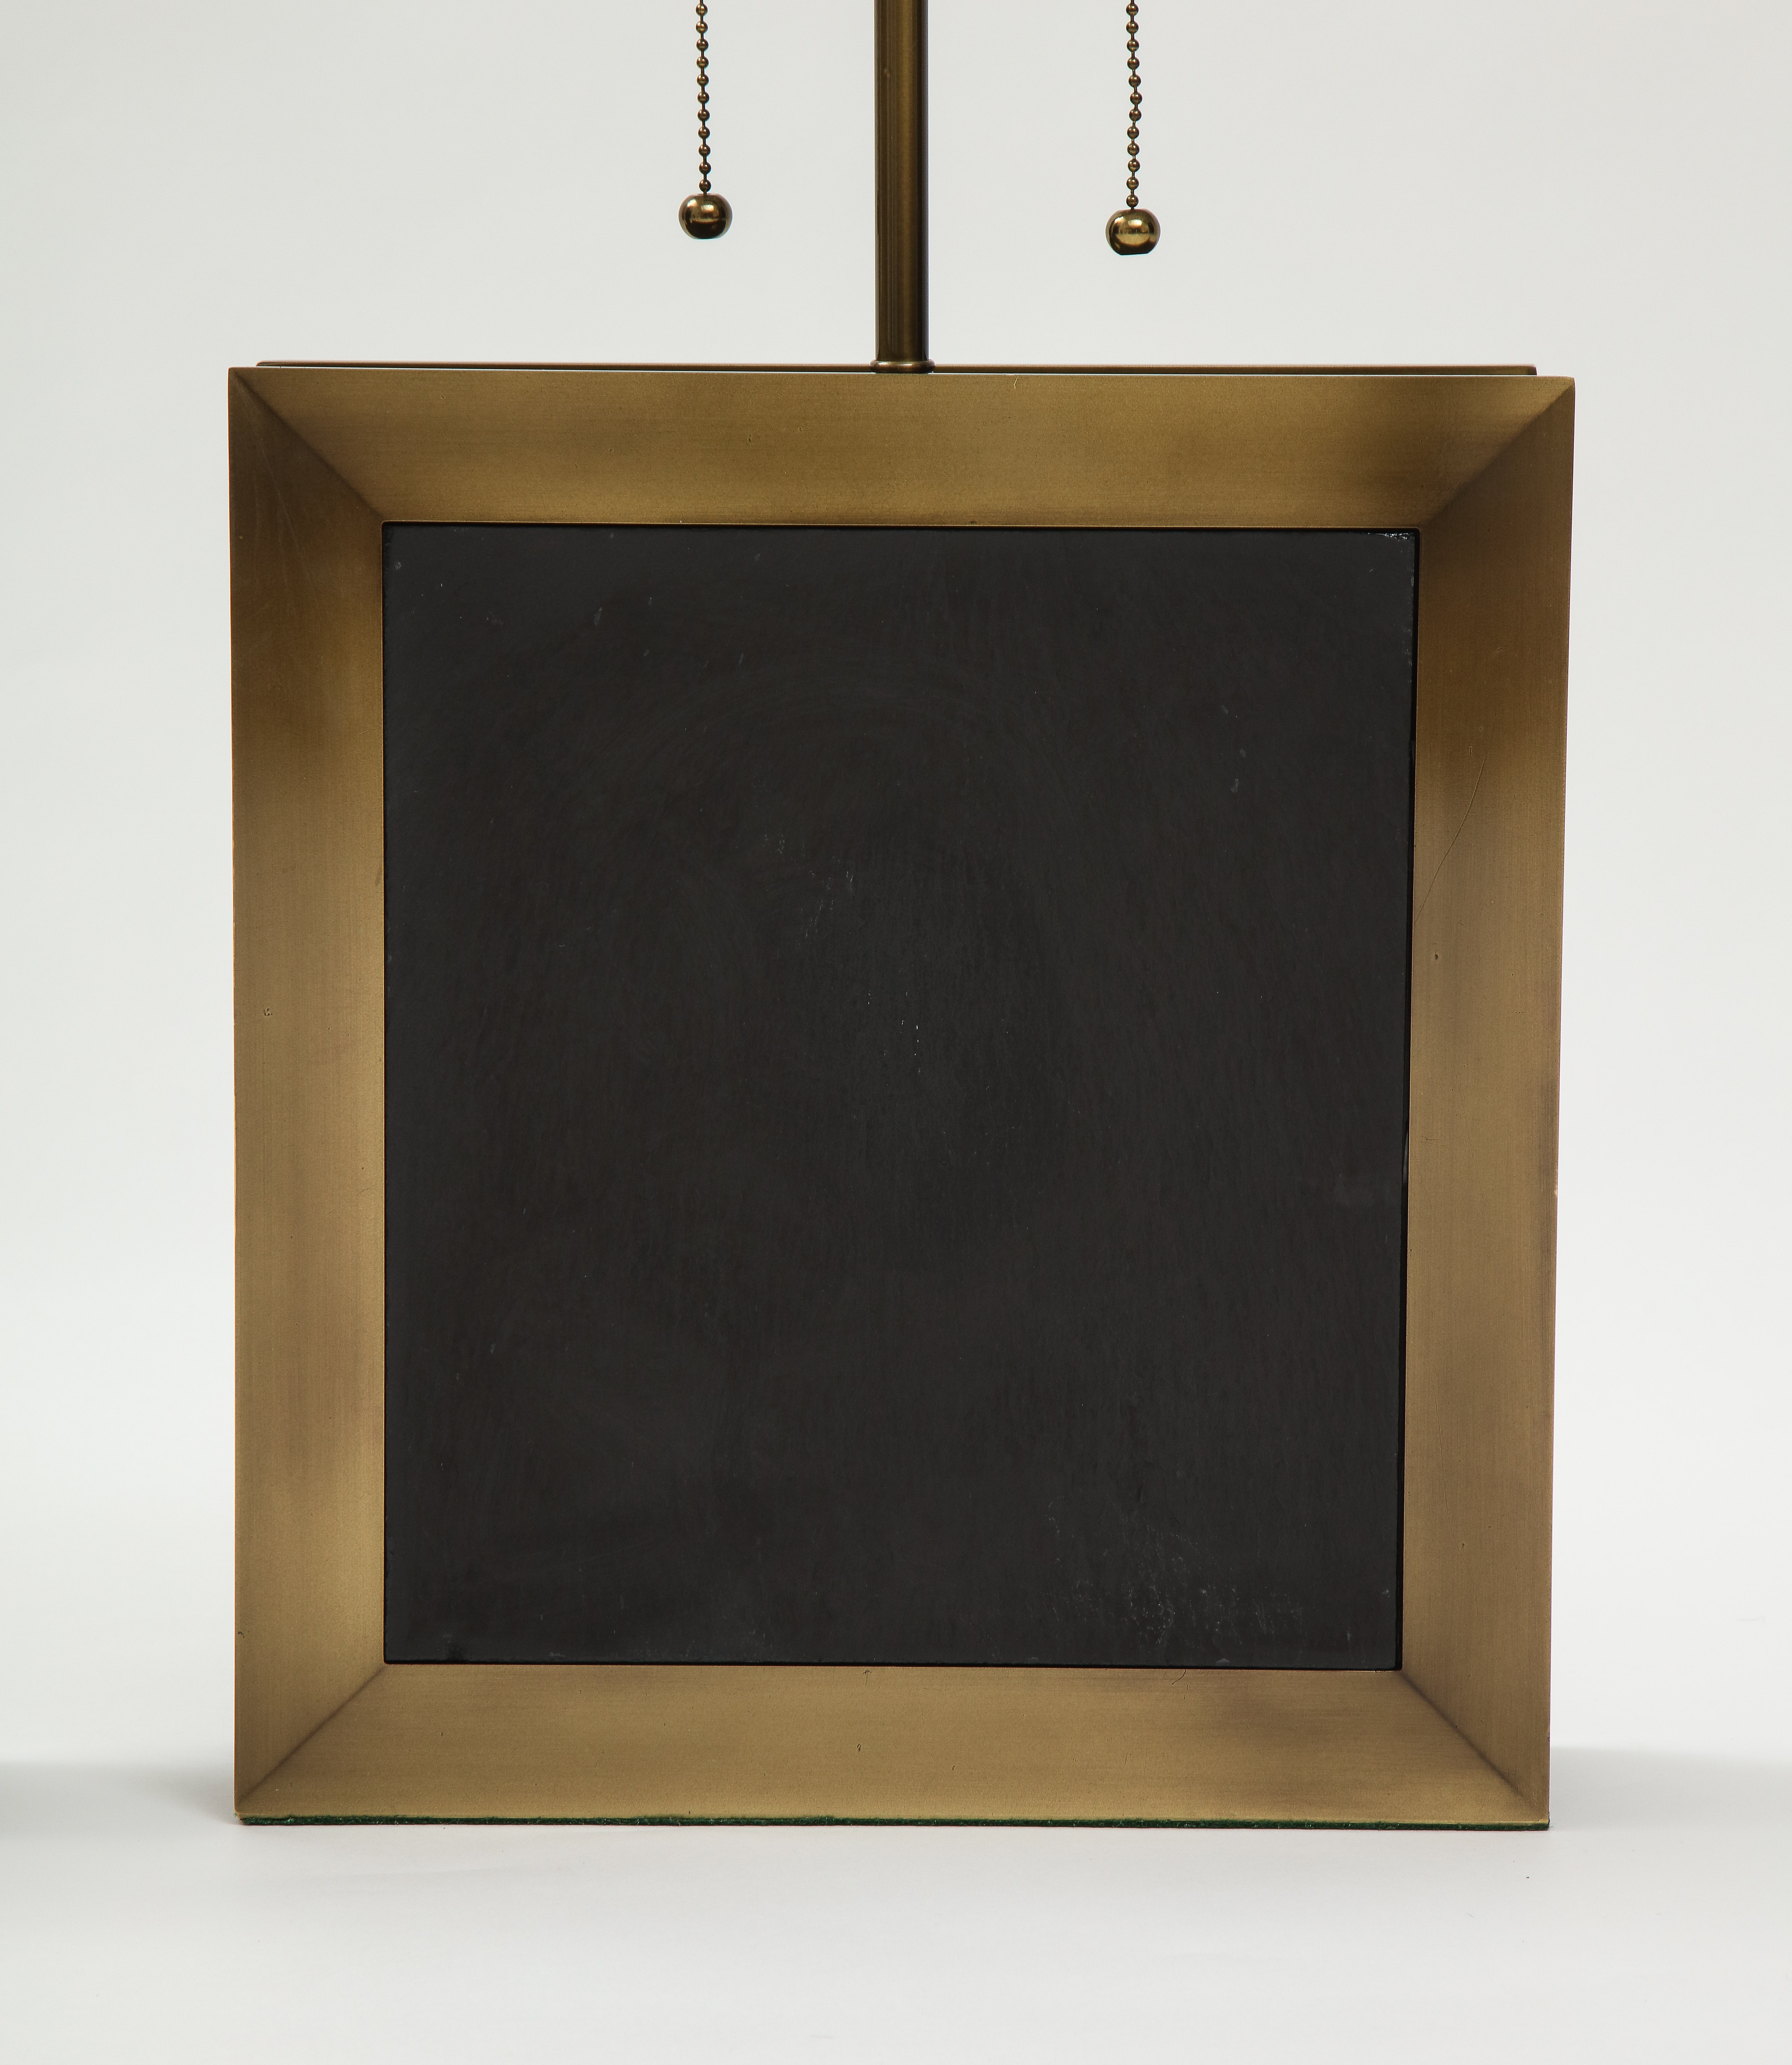 Pair of square shaped lamps